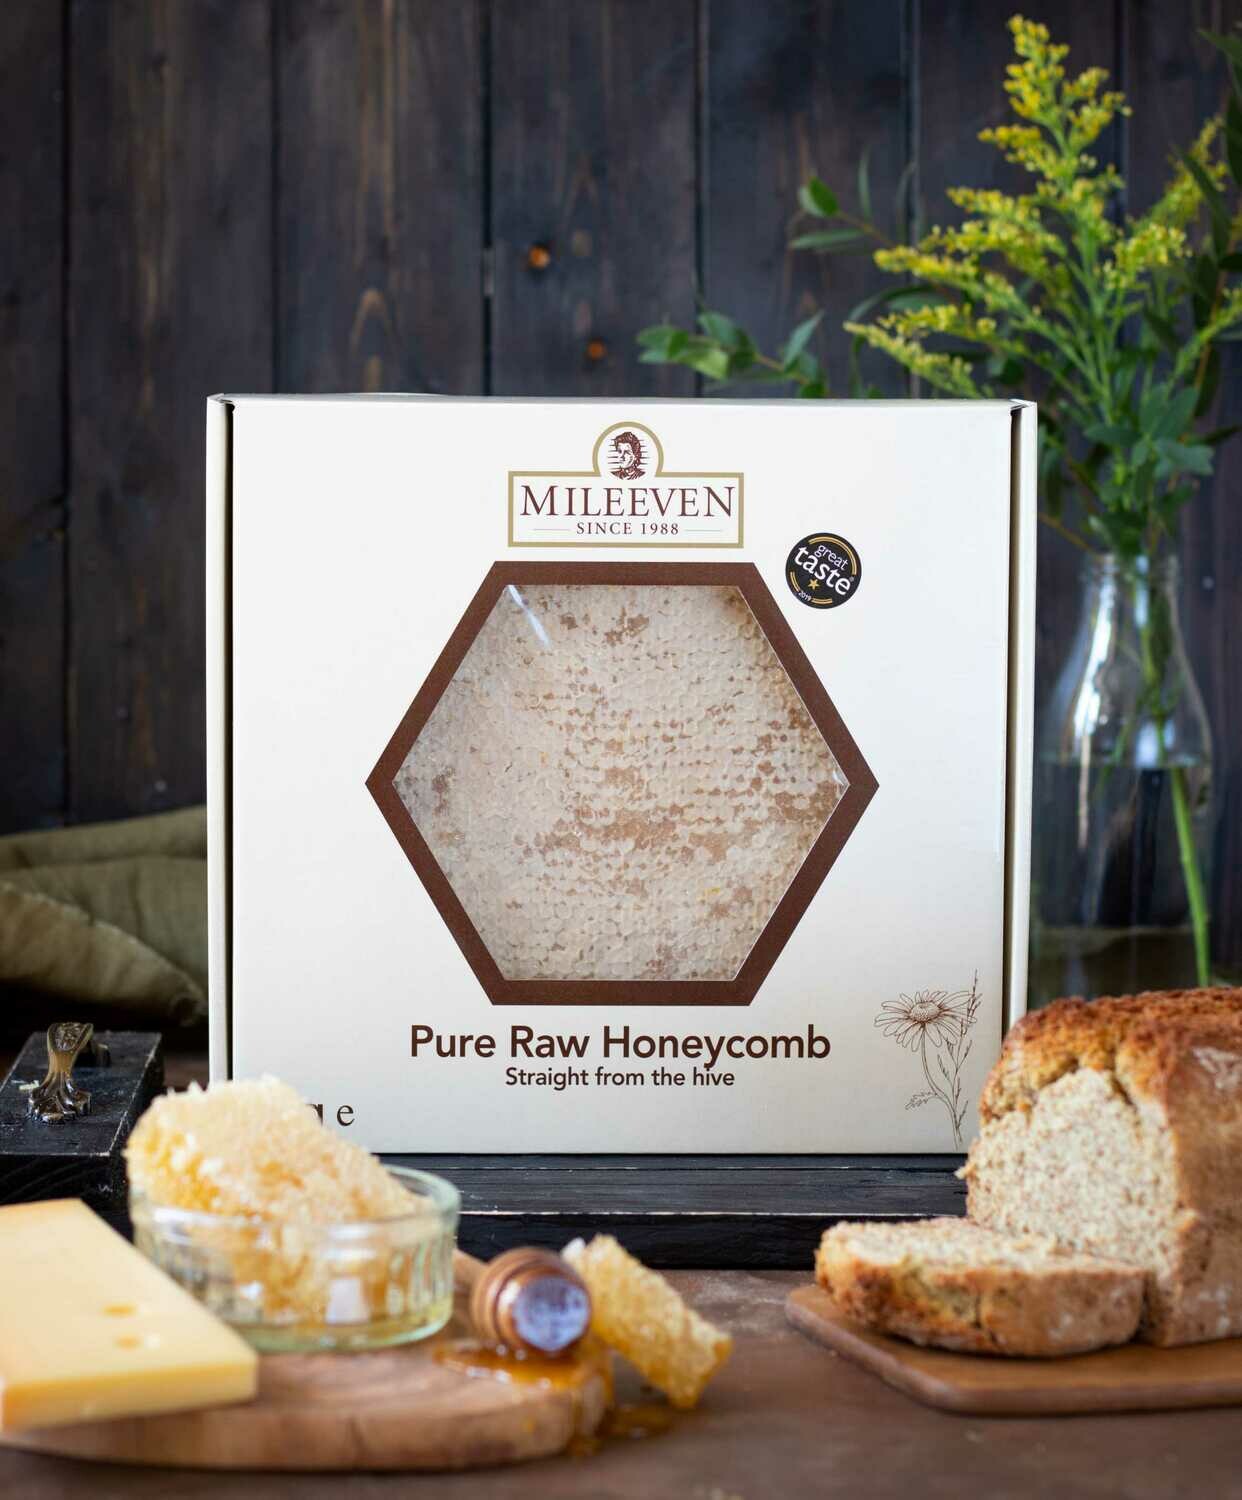 Award Winning - Mileeven 1Kg Pure, Raw Honeycomb, Straight from the Hive